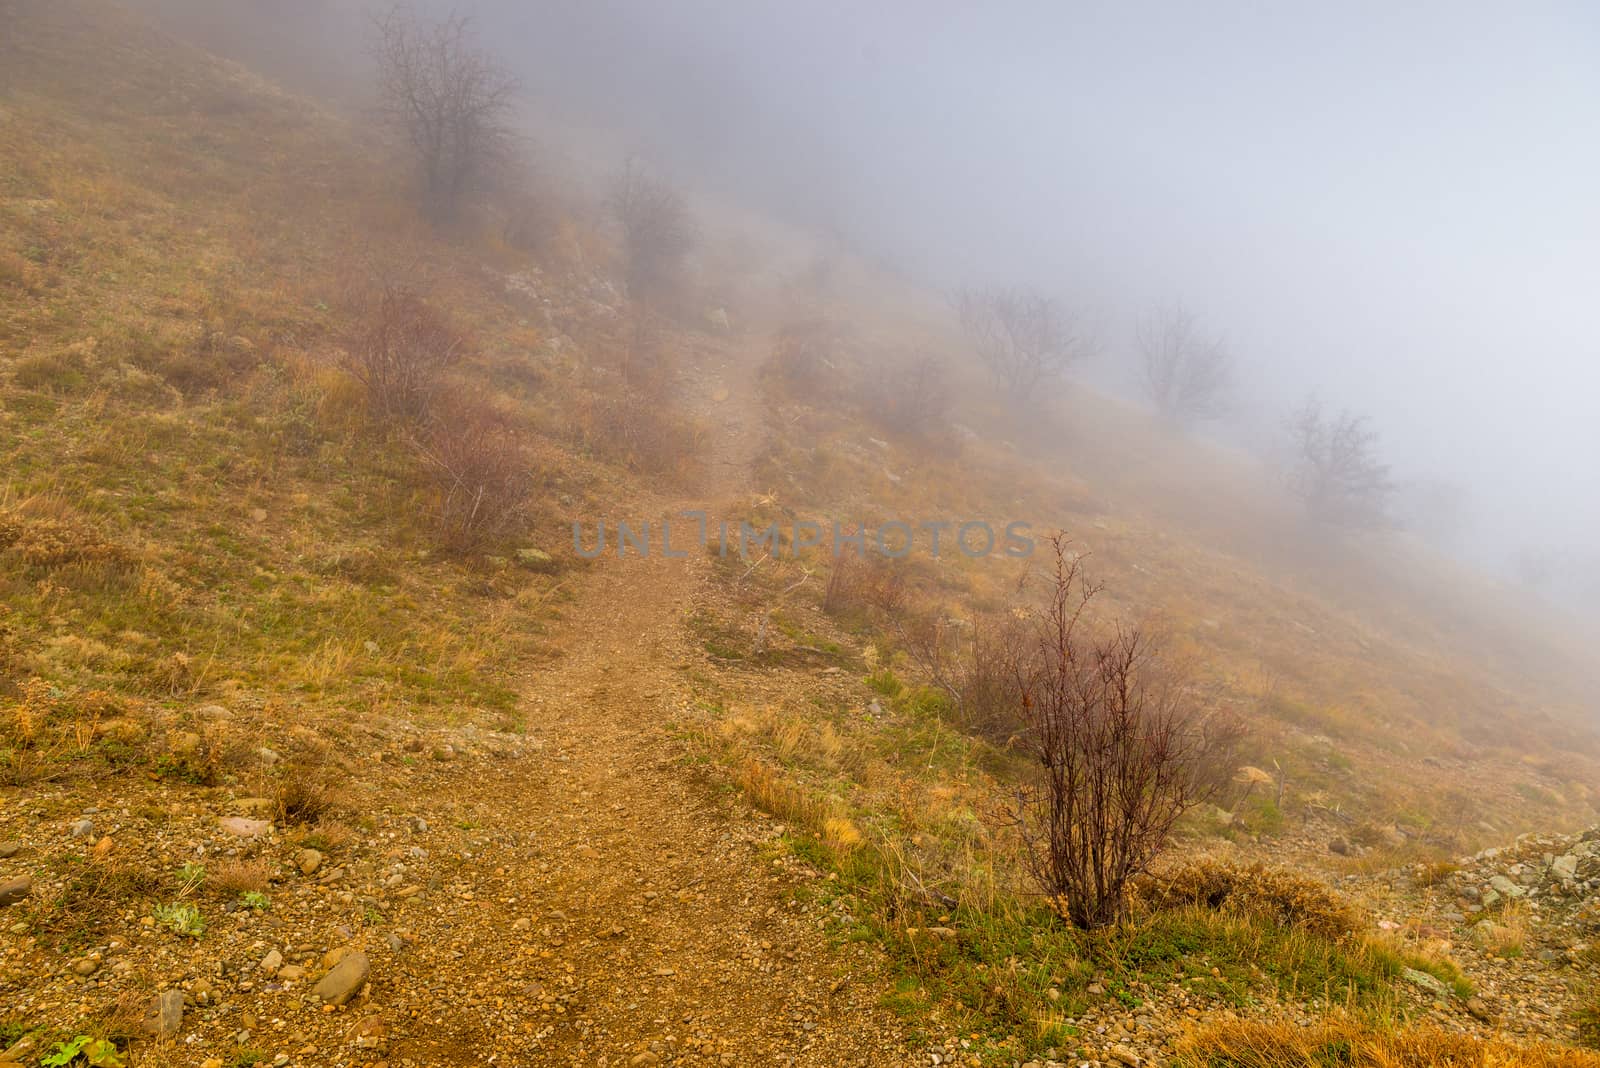 gloomy autumn landscape on a foggy day in the mountains by kosmsos111